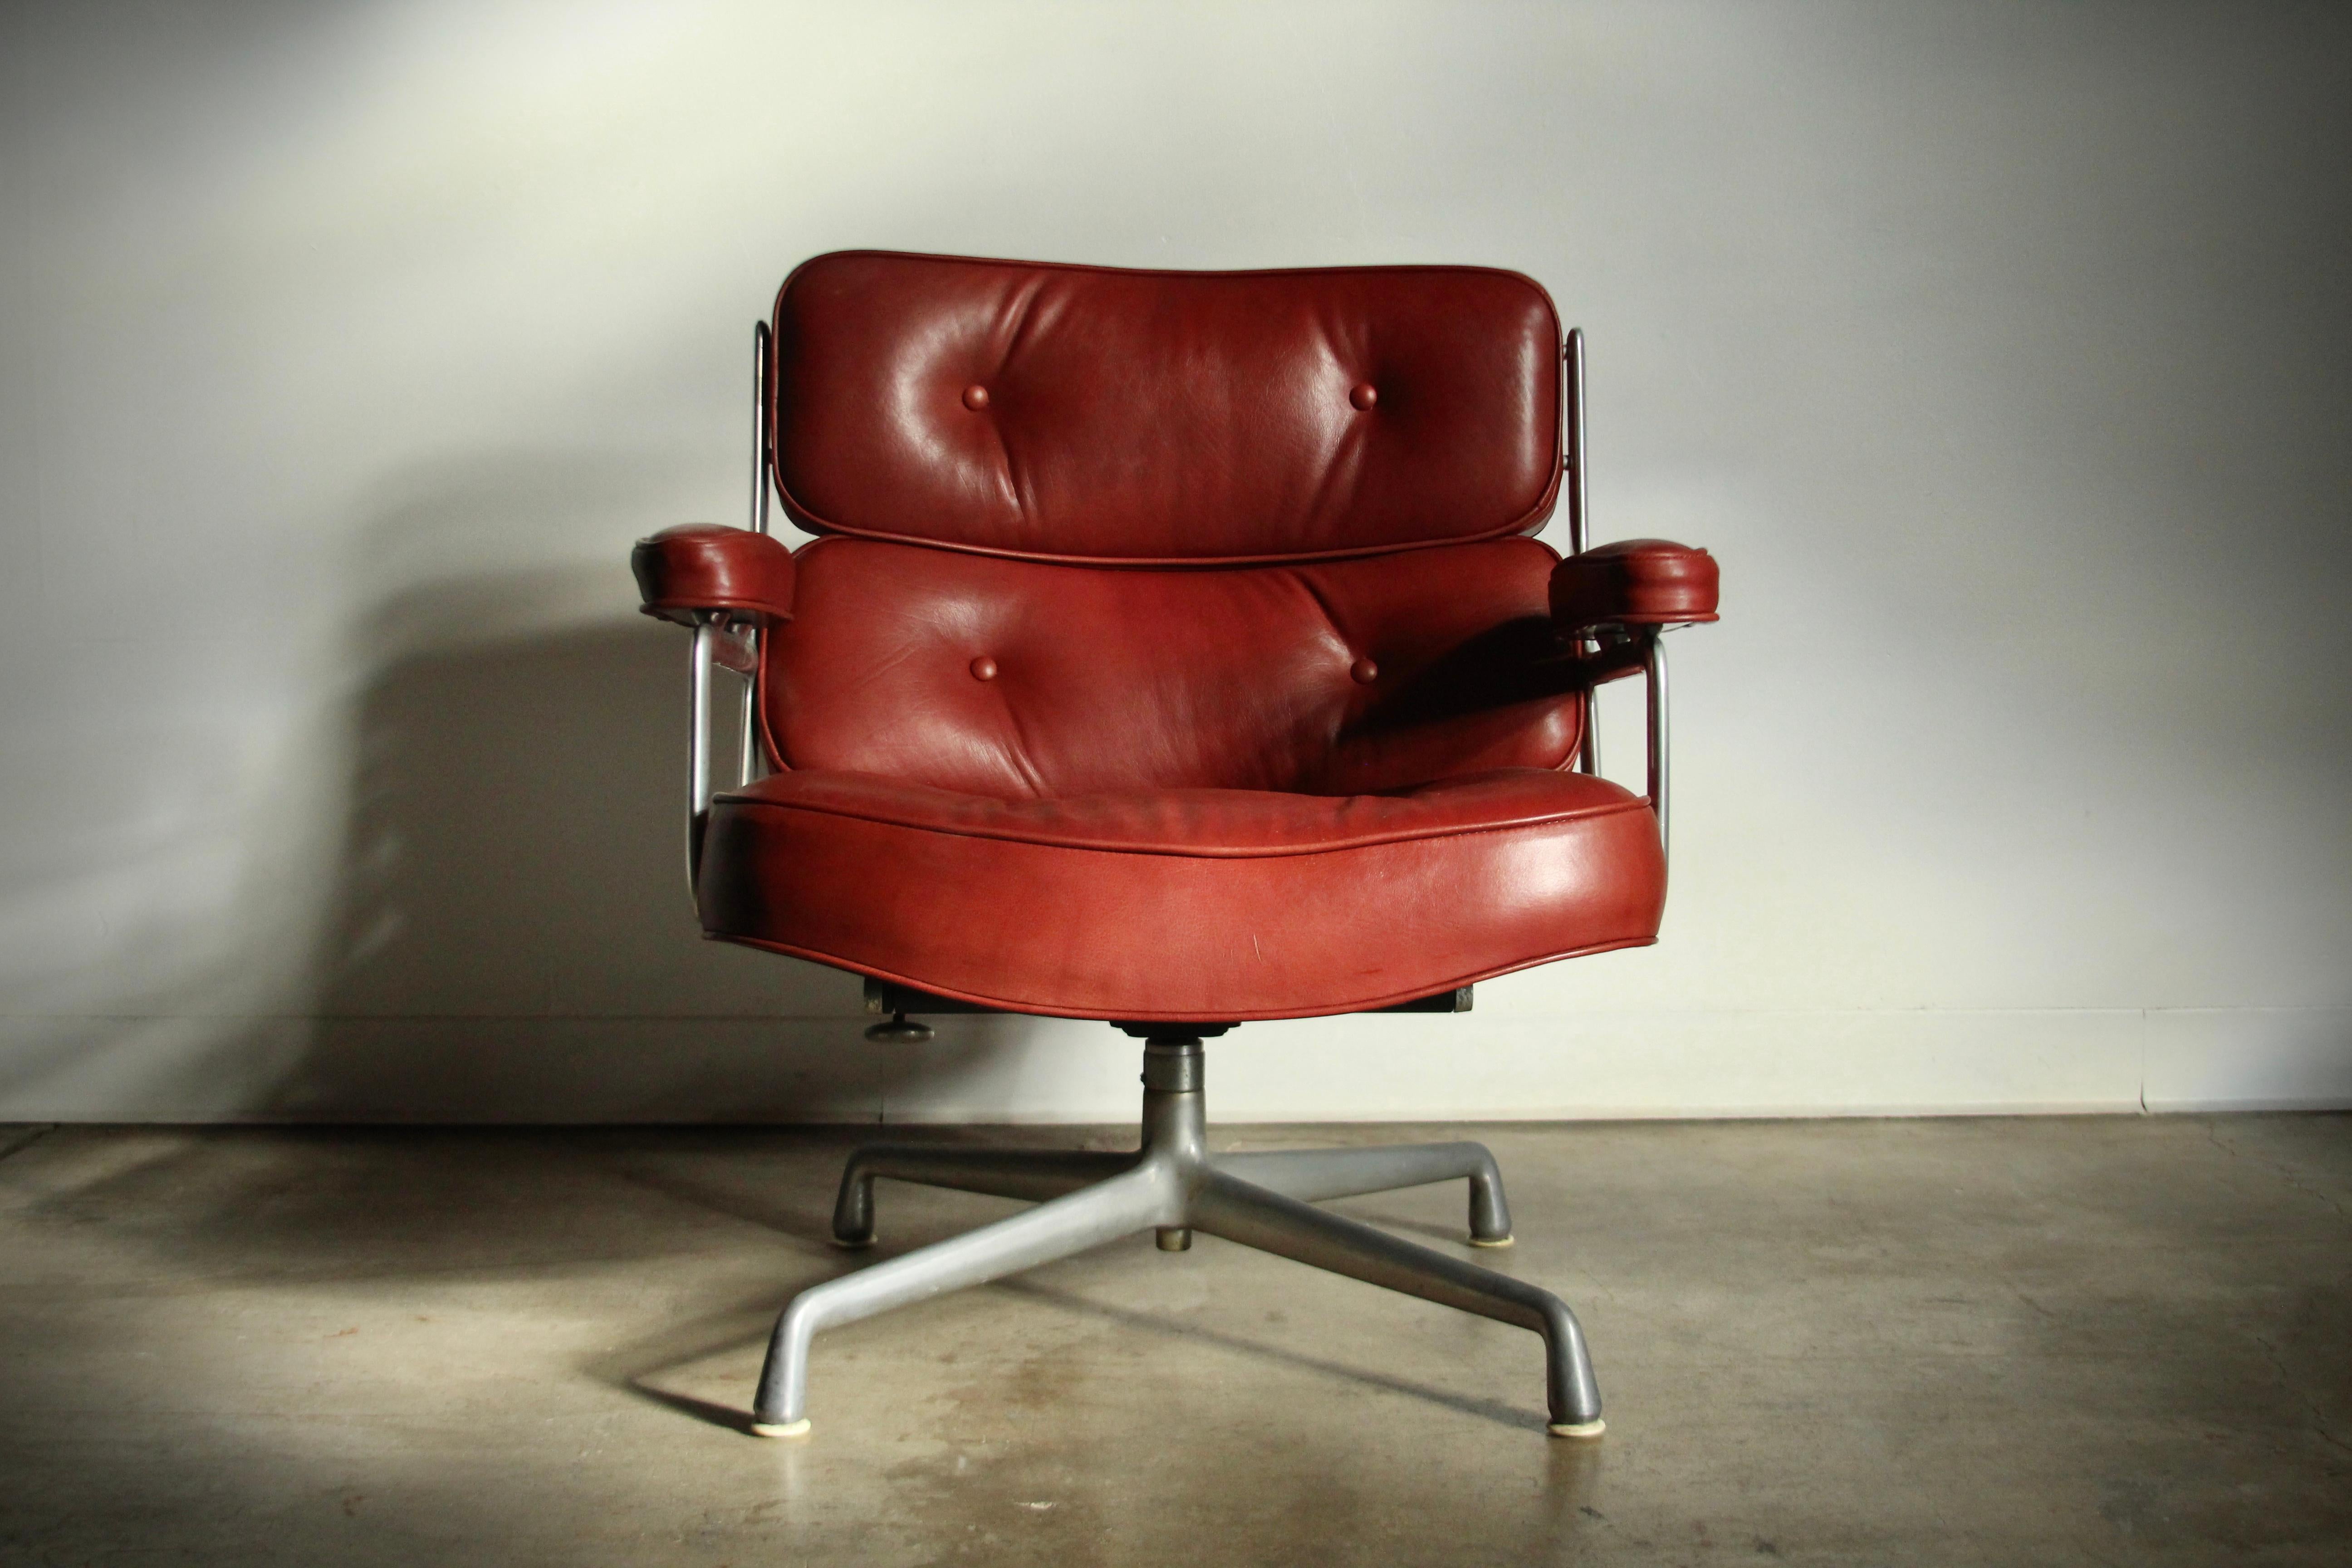 Eames Time Life Lobby Lounge Chair in Oxblood Calfskin Leather, 1960s For Sale 8